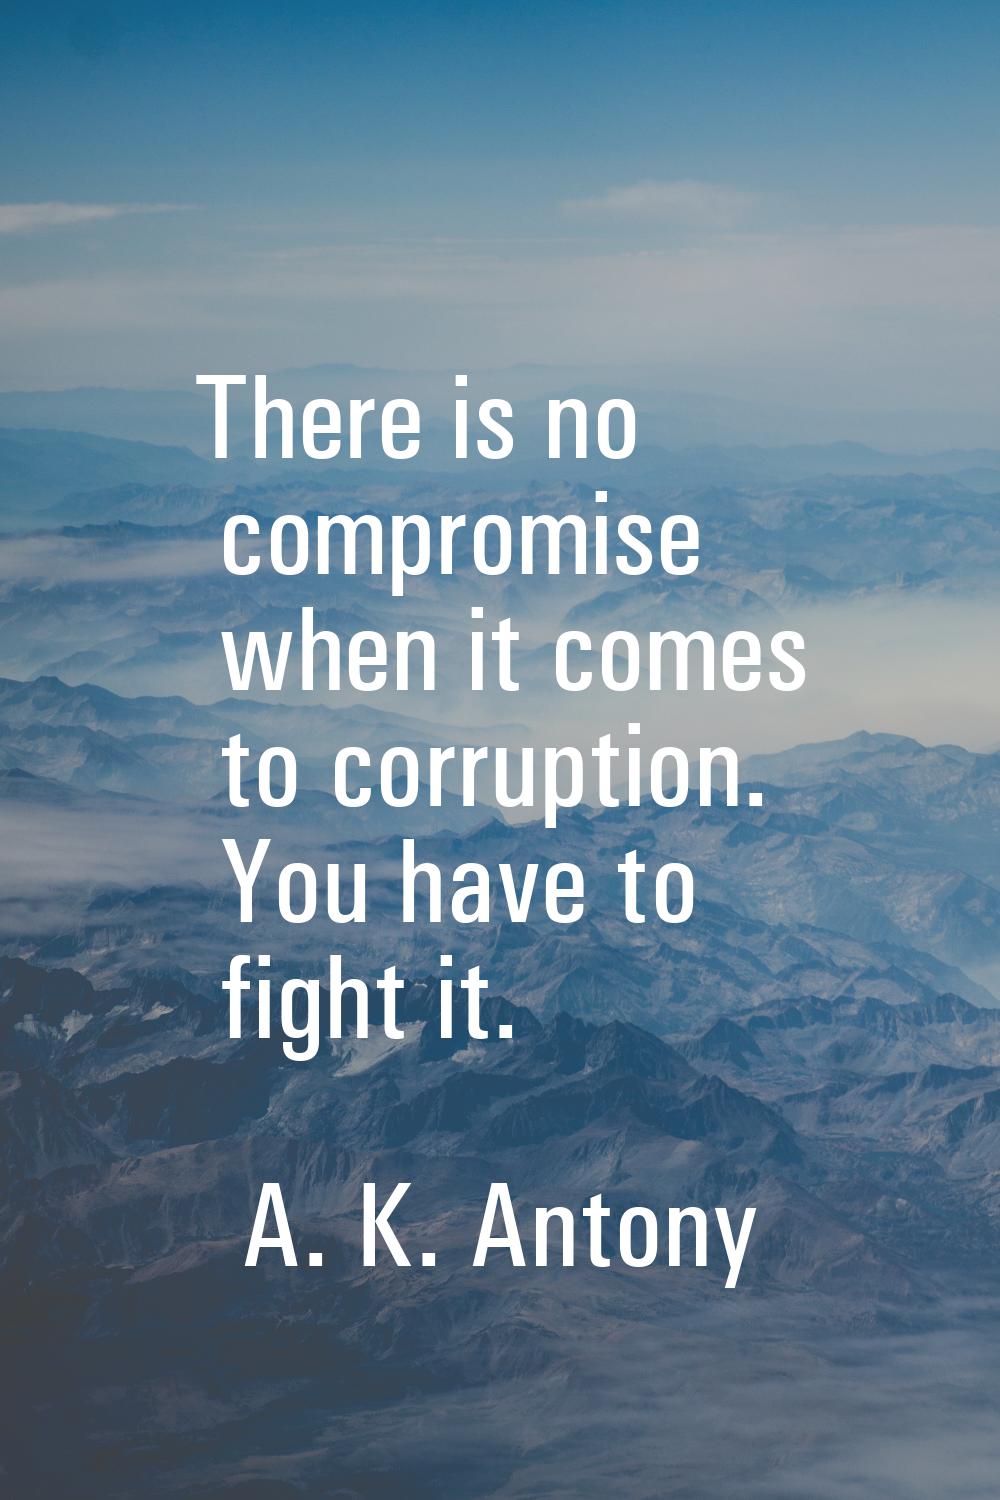 There is no compromise when it comes to corruption. You have to fight it.